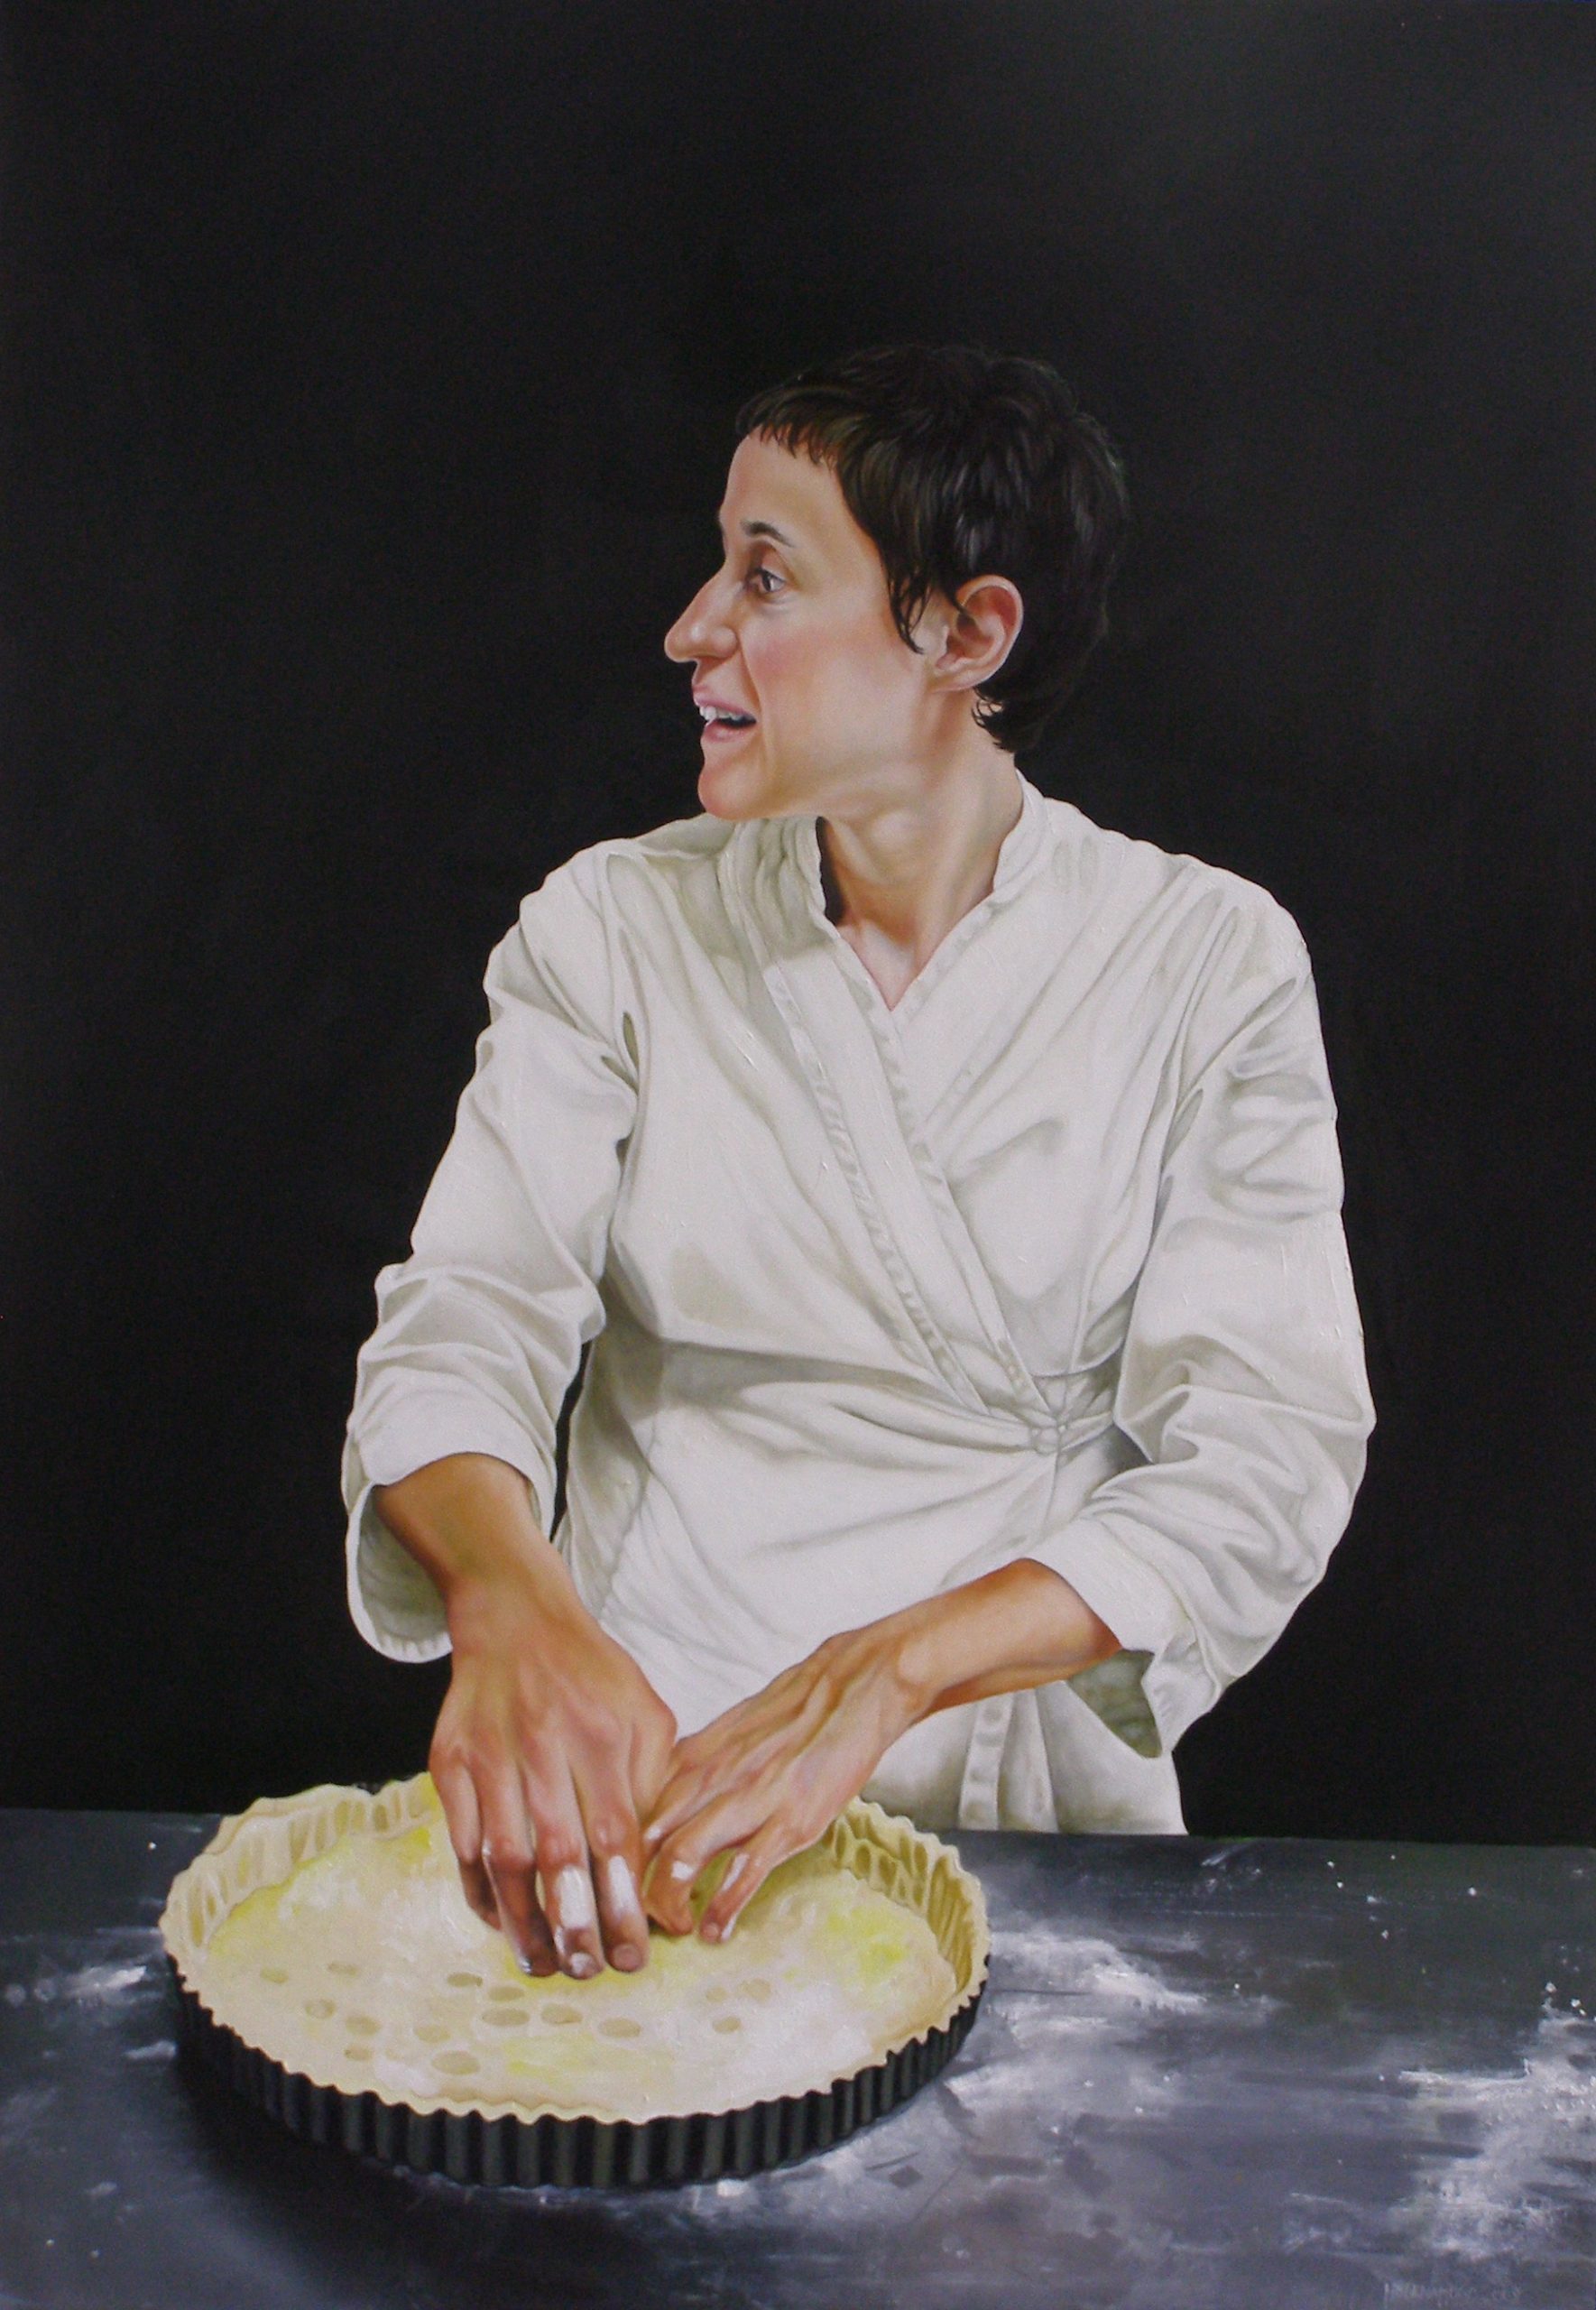 Cheese Cake
100cm x 70cm
Oil on board